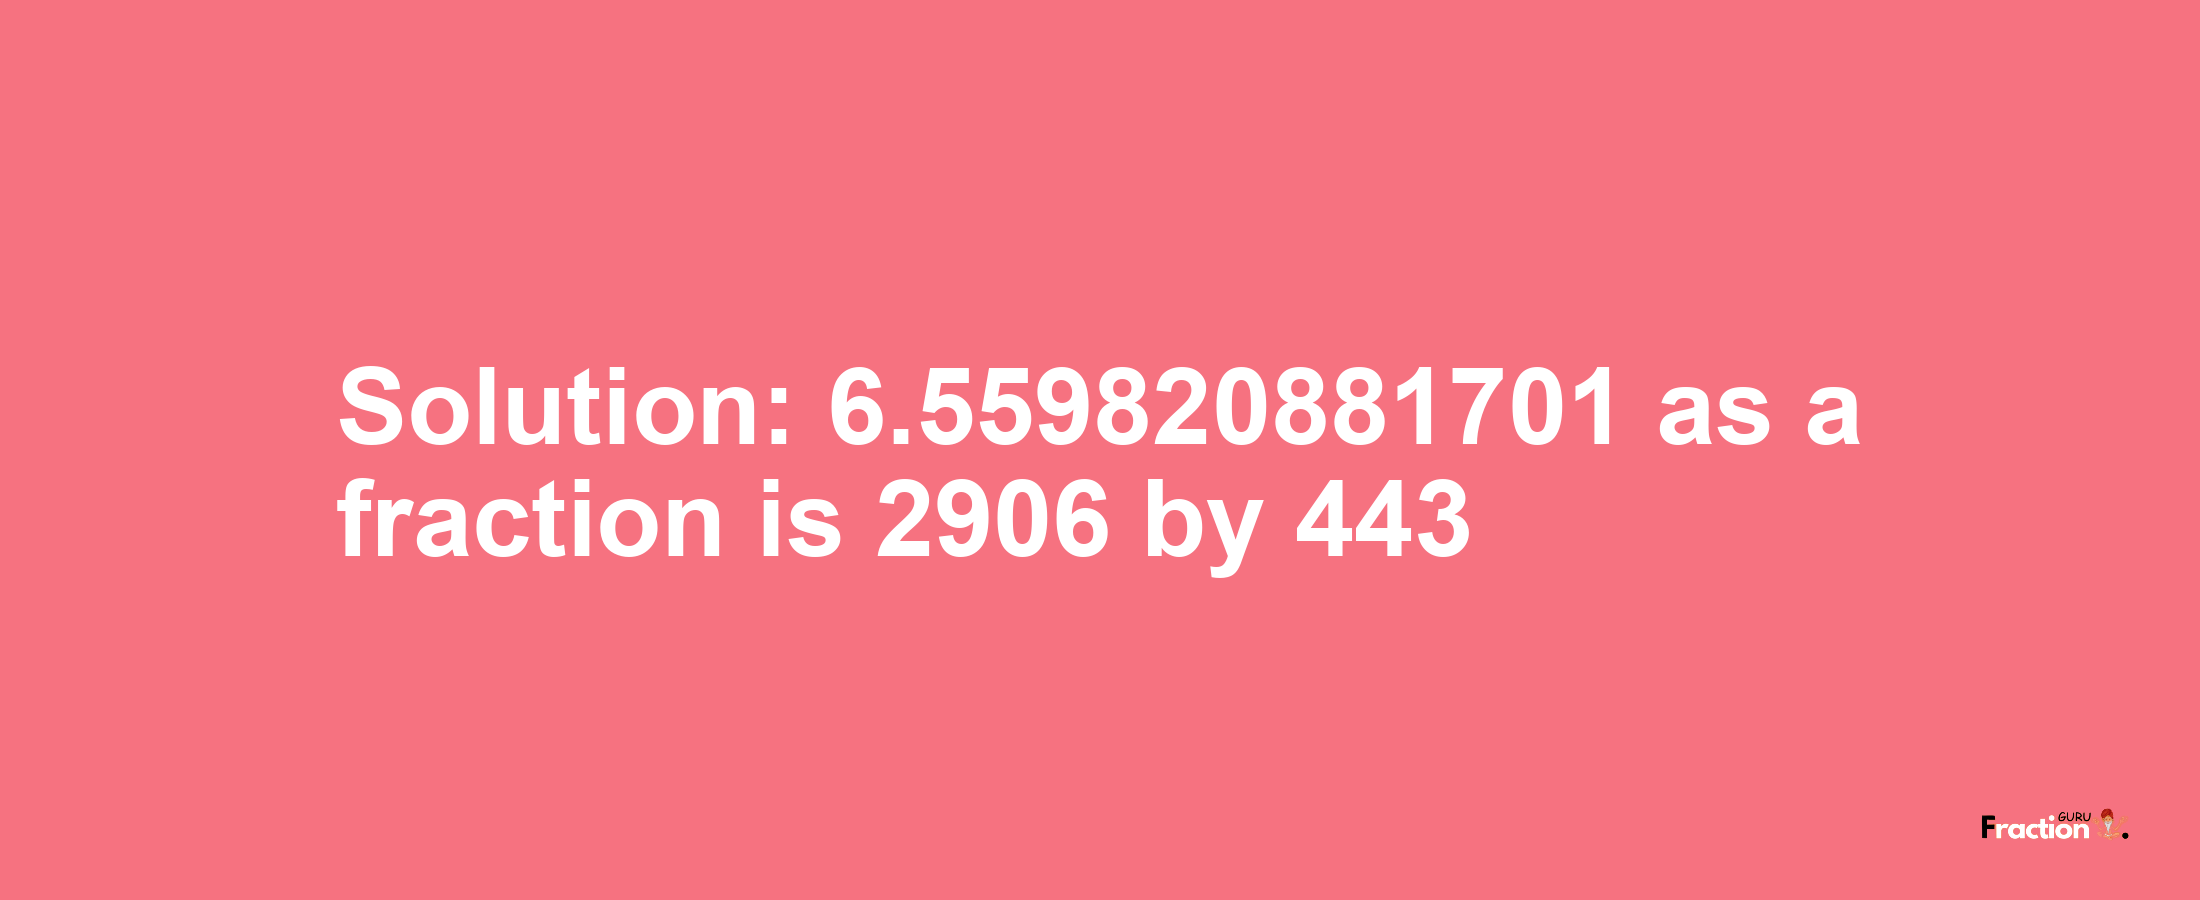 Solution:6.559820881701 as a fraction is 2906/443